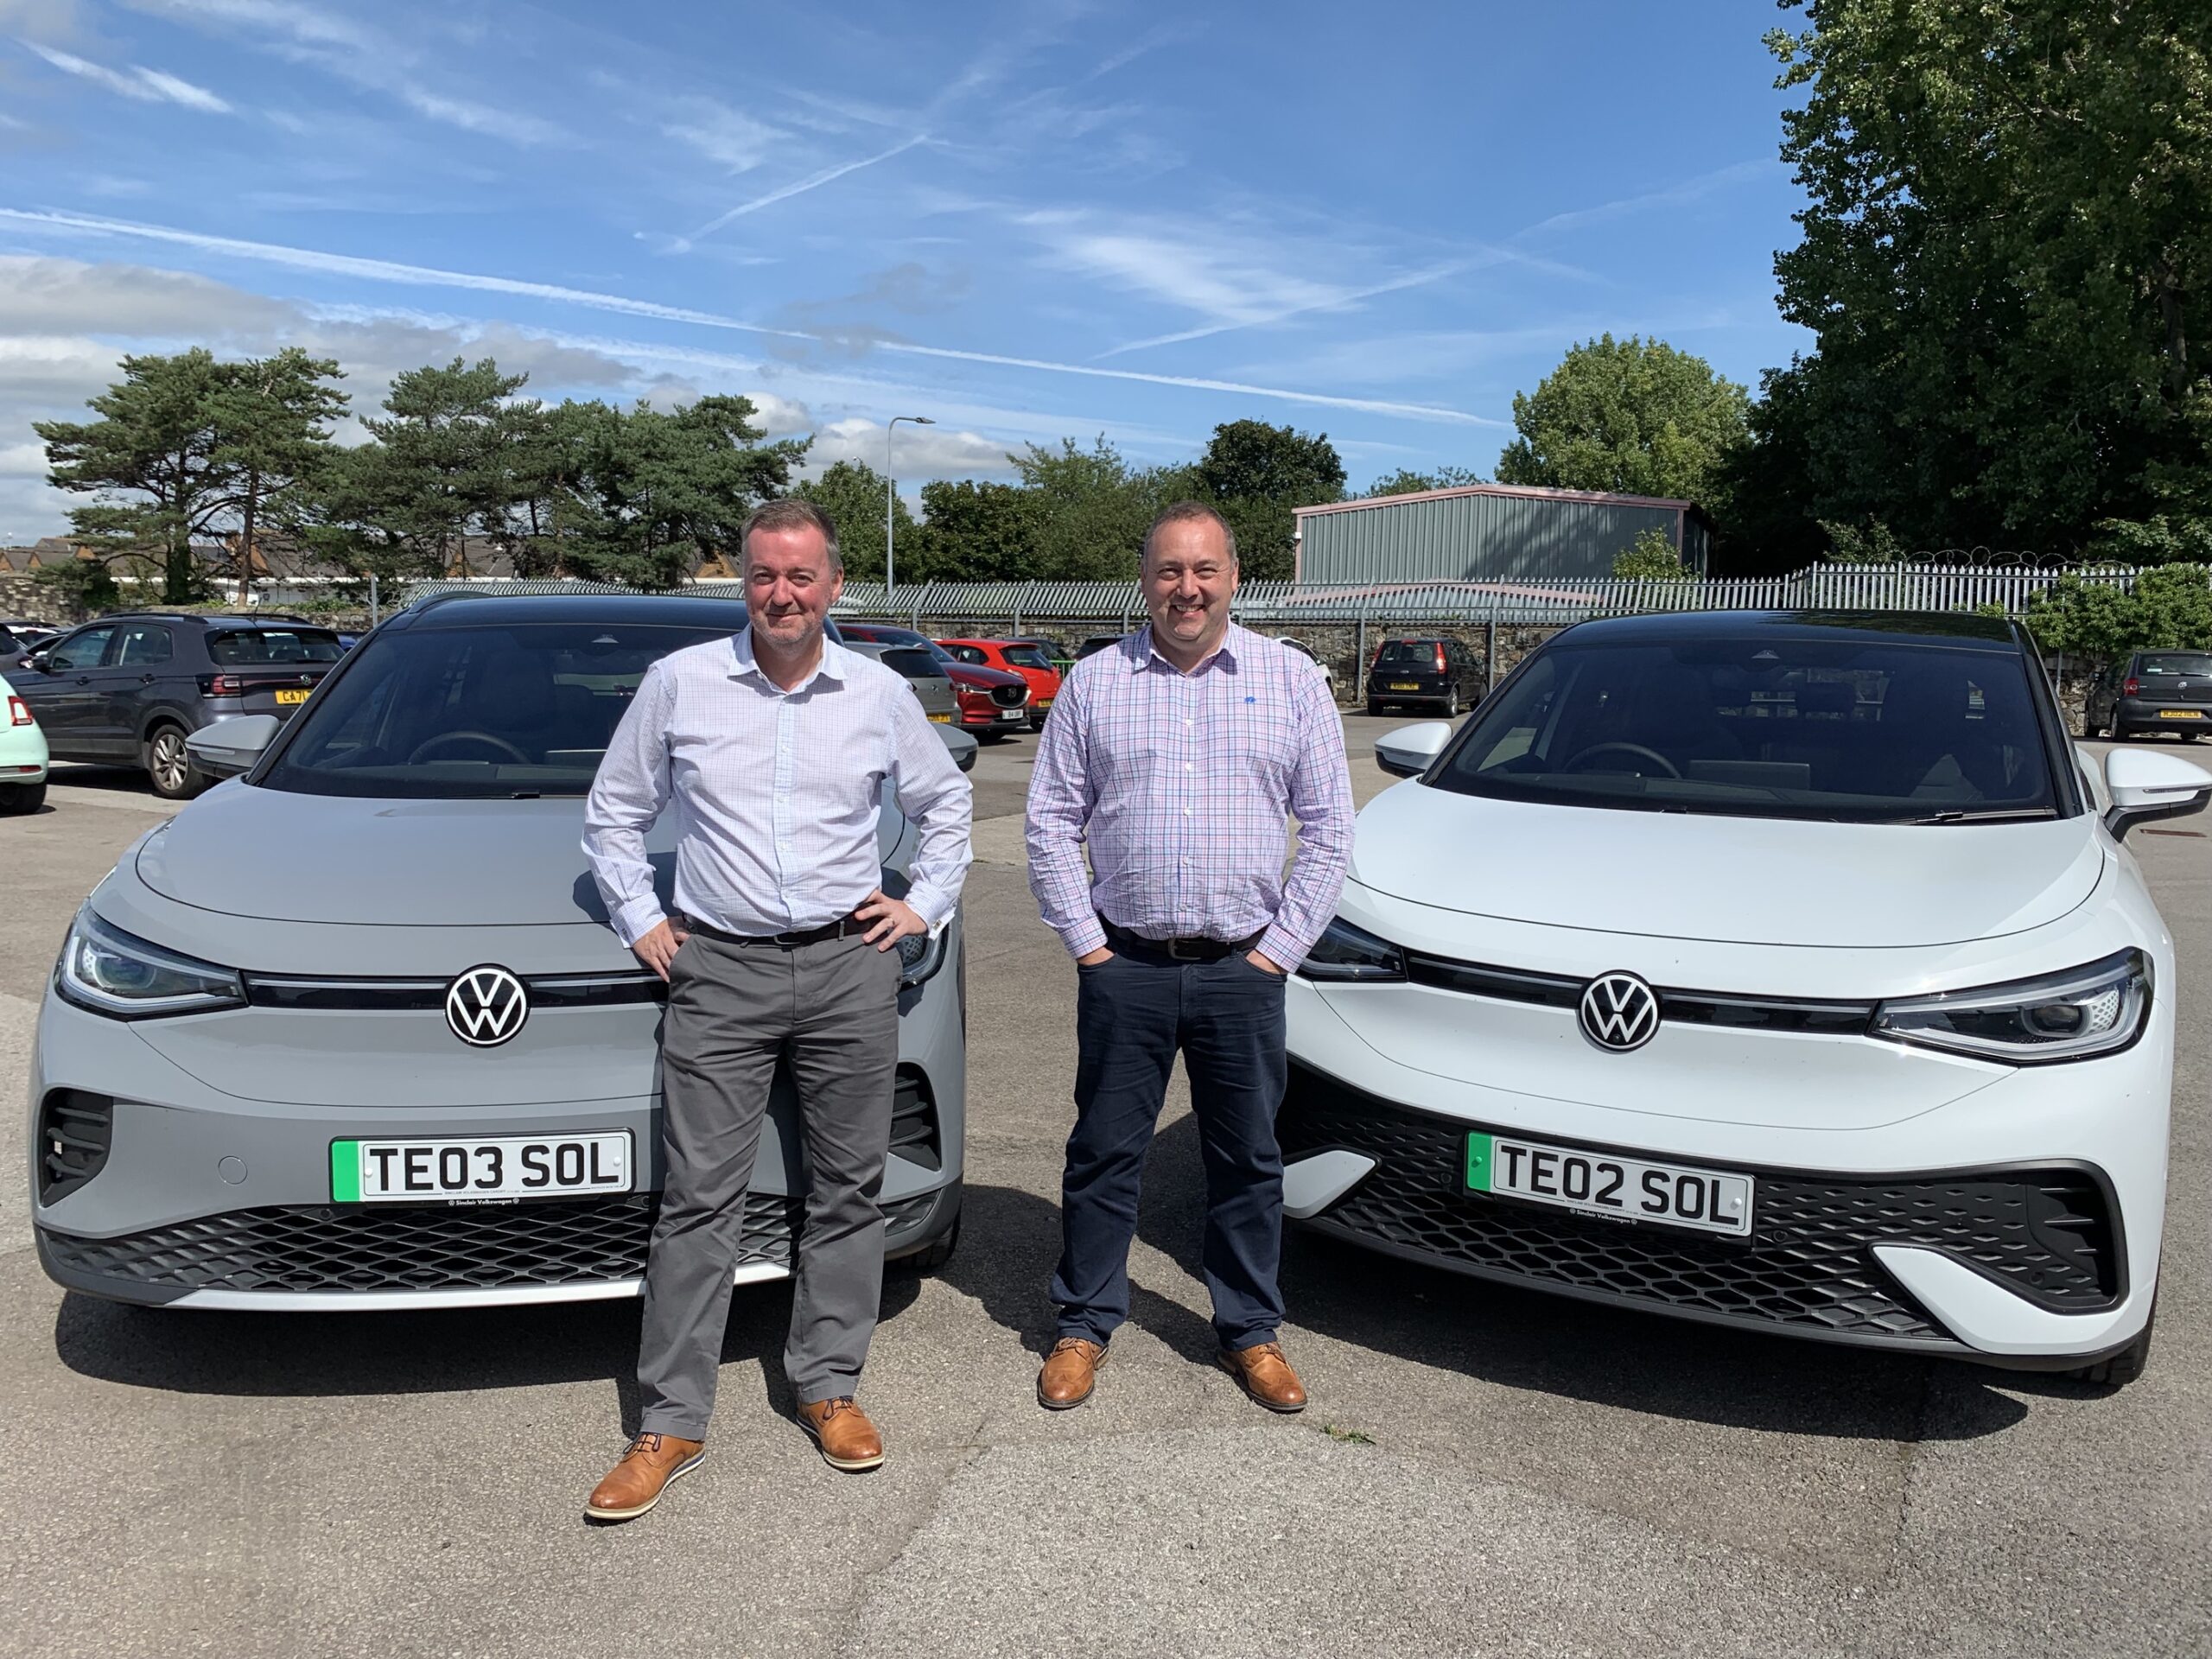 Techsol Group is proud to announce that we have taken a significant step towards reducing our carbon footprint and improving our environmental impact by switching to electric vehicles.